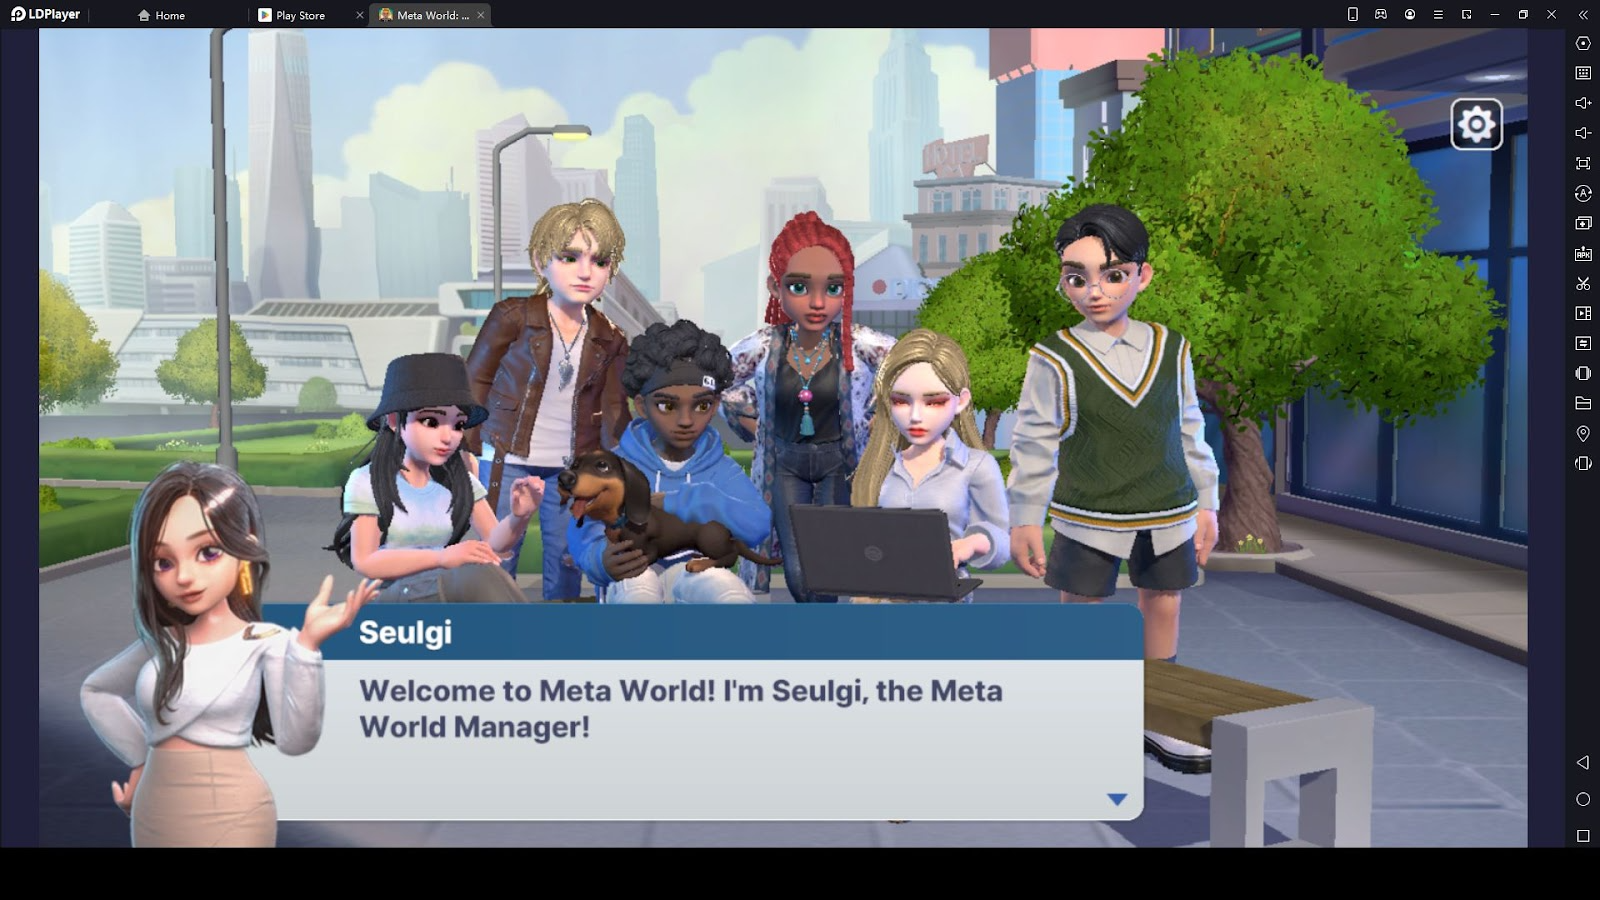 SKIP Downloads *PLAY FIRST* 😎  Meta World - My City on #nowgg